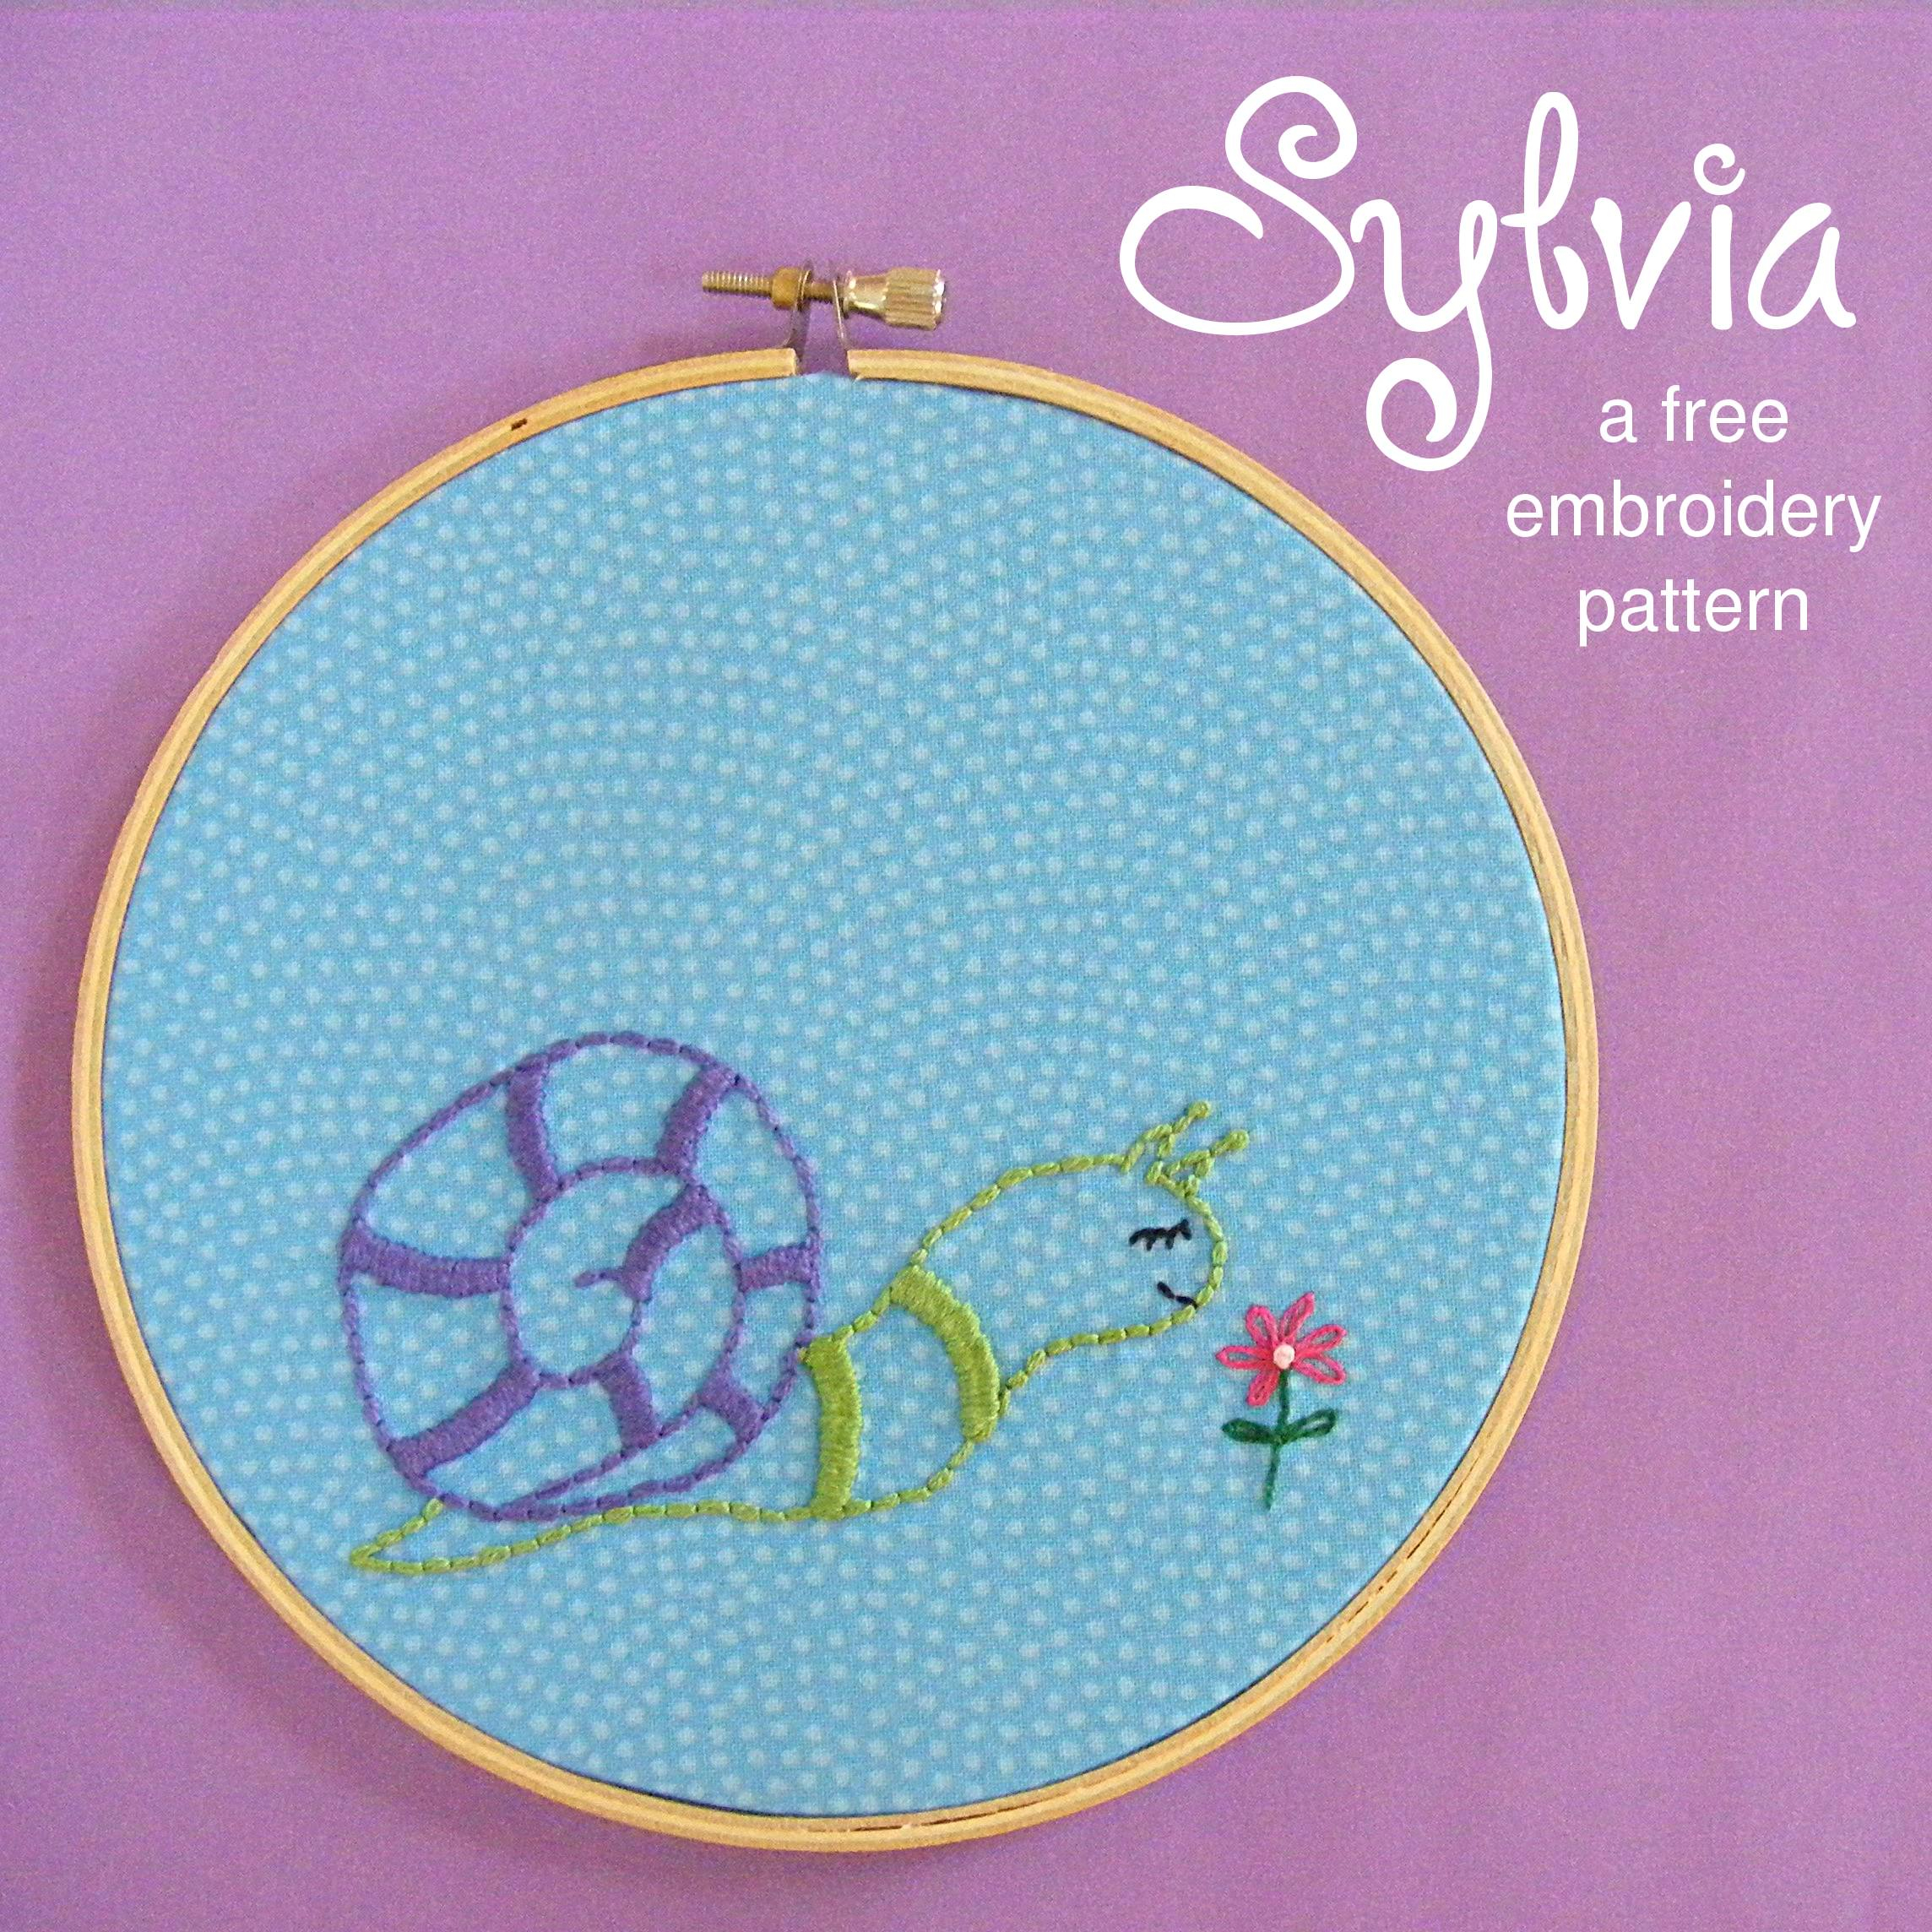 Embroidery Free Patterns Sweet Sylvia Snail A Free Embroidery Pattern Shiny Happy World